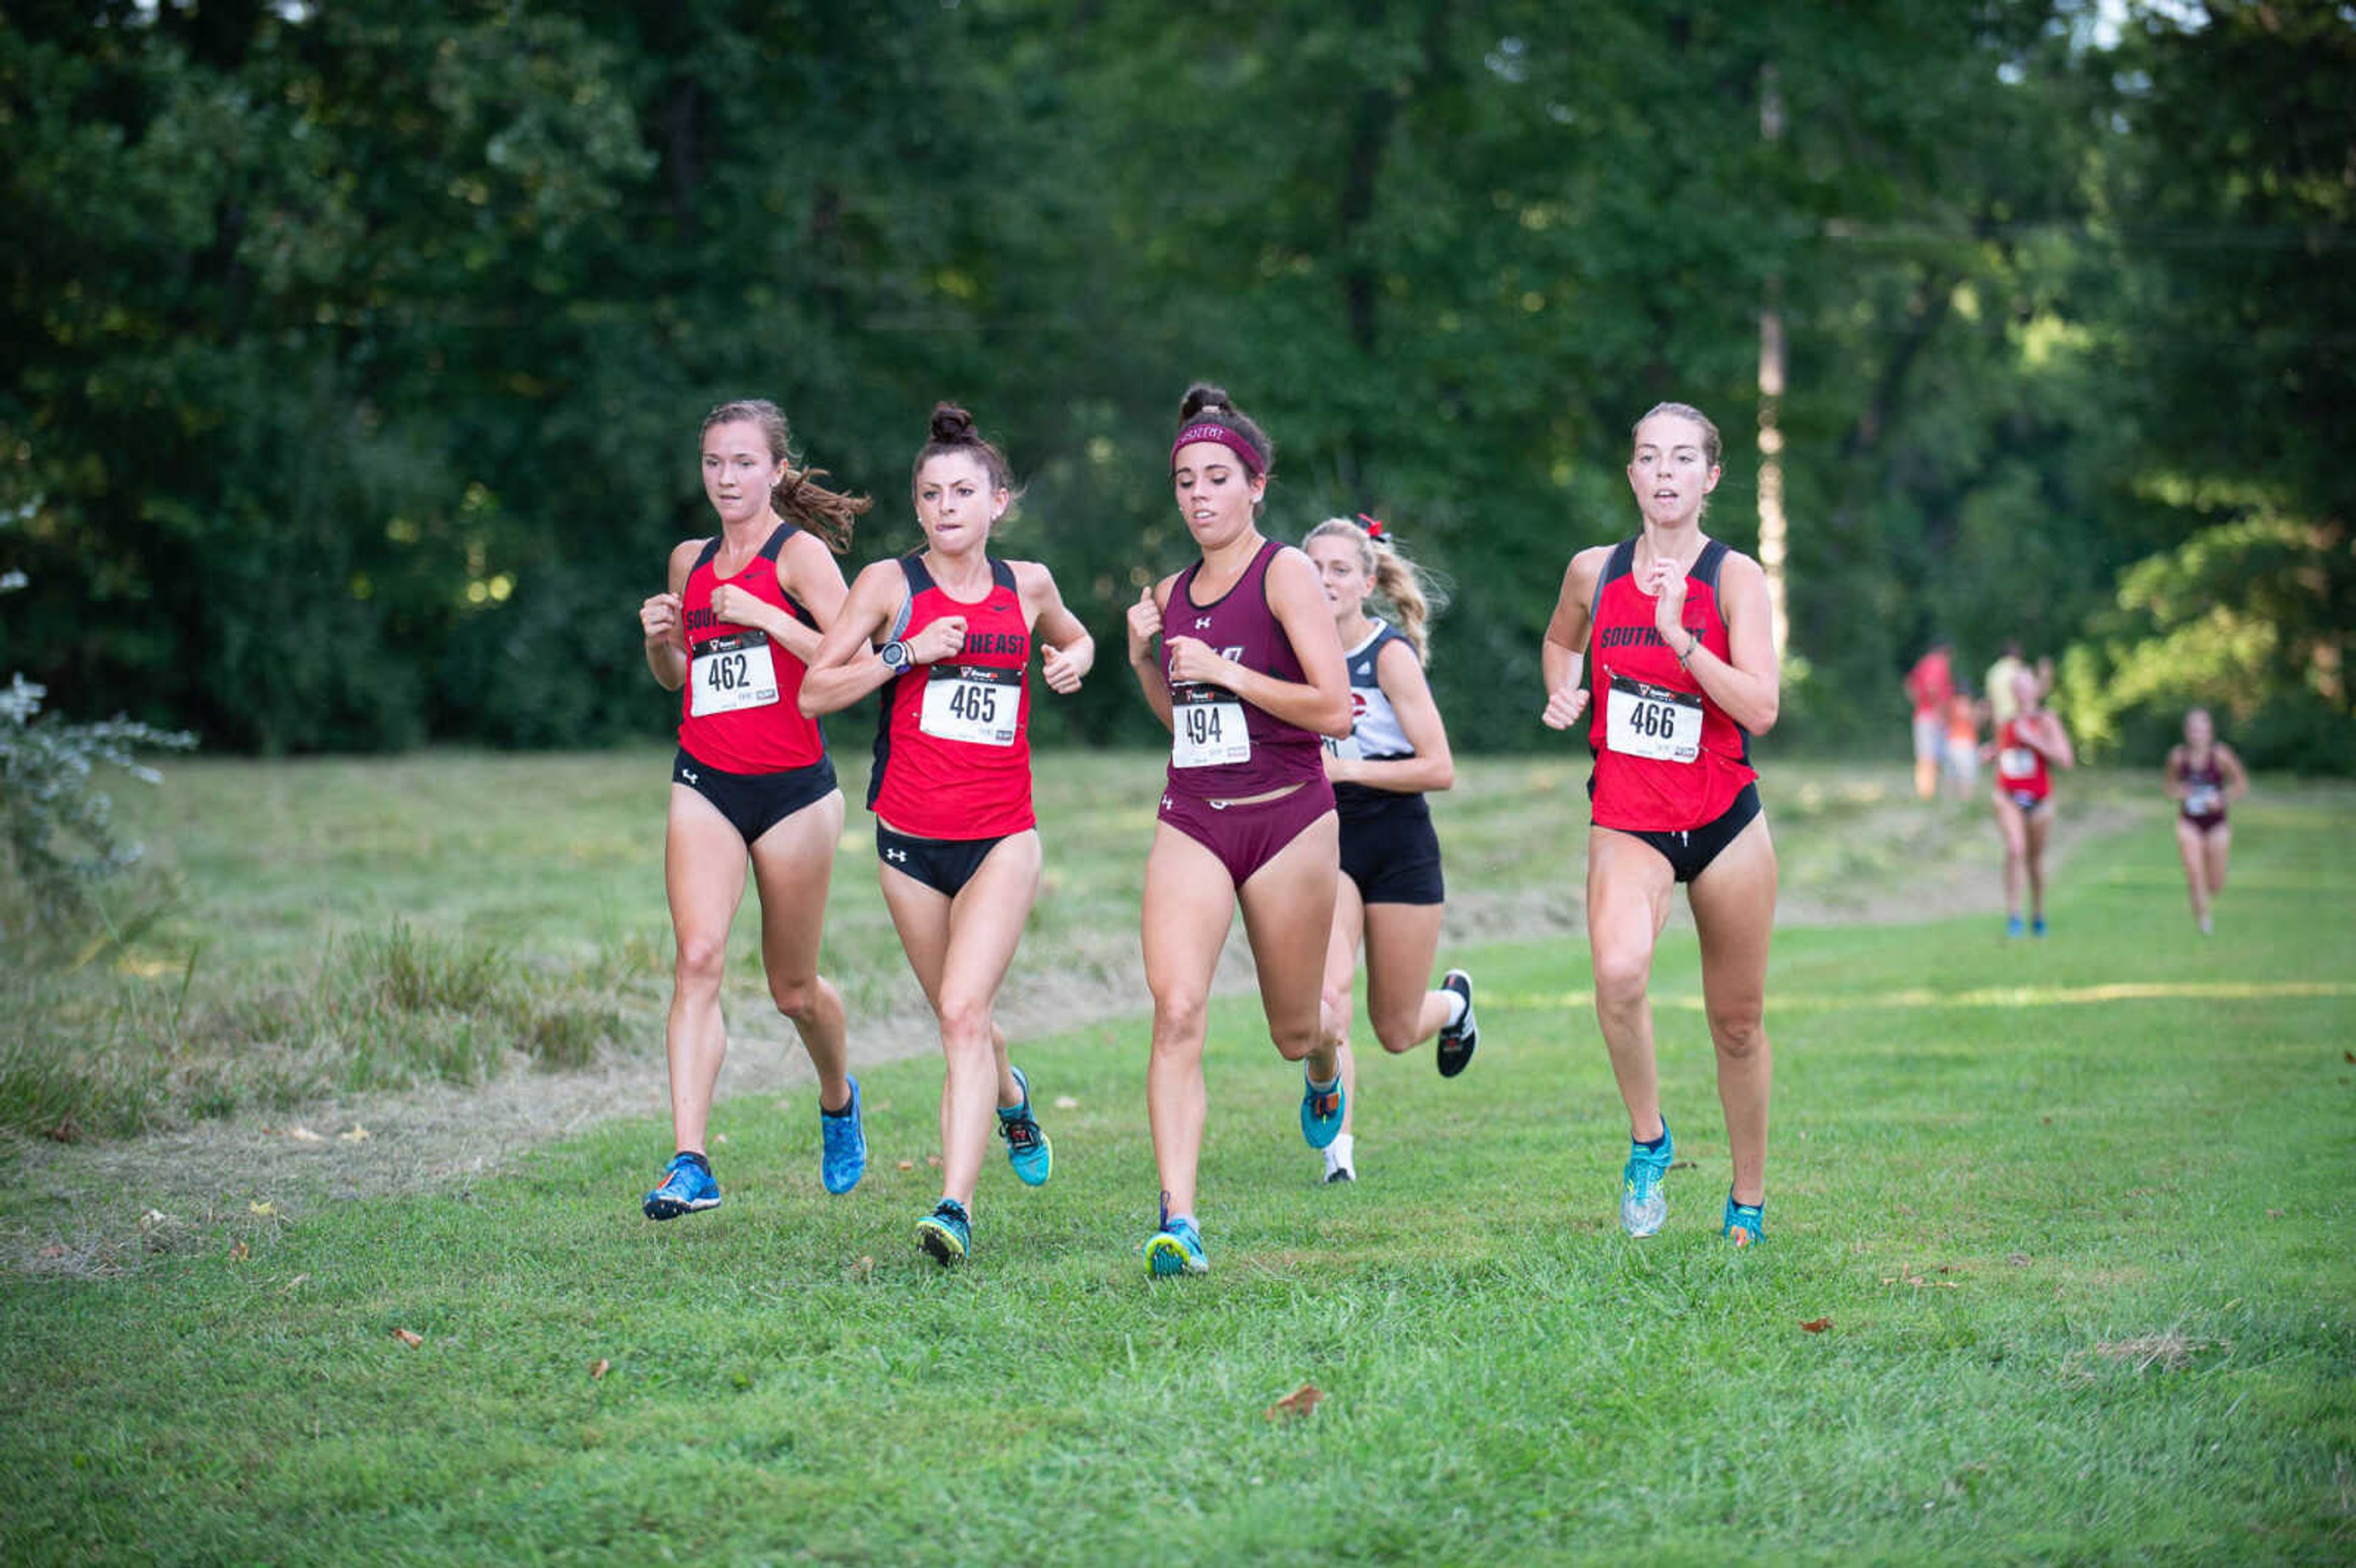 Carlin Knott (#462), Sydney O'Brien (#465) and Kaitlyn Shea (#466) leading the pack during the Saluki Invite on Aug. 31.